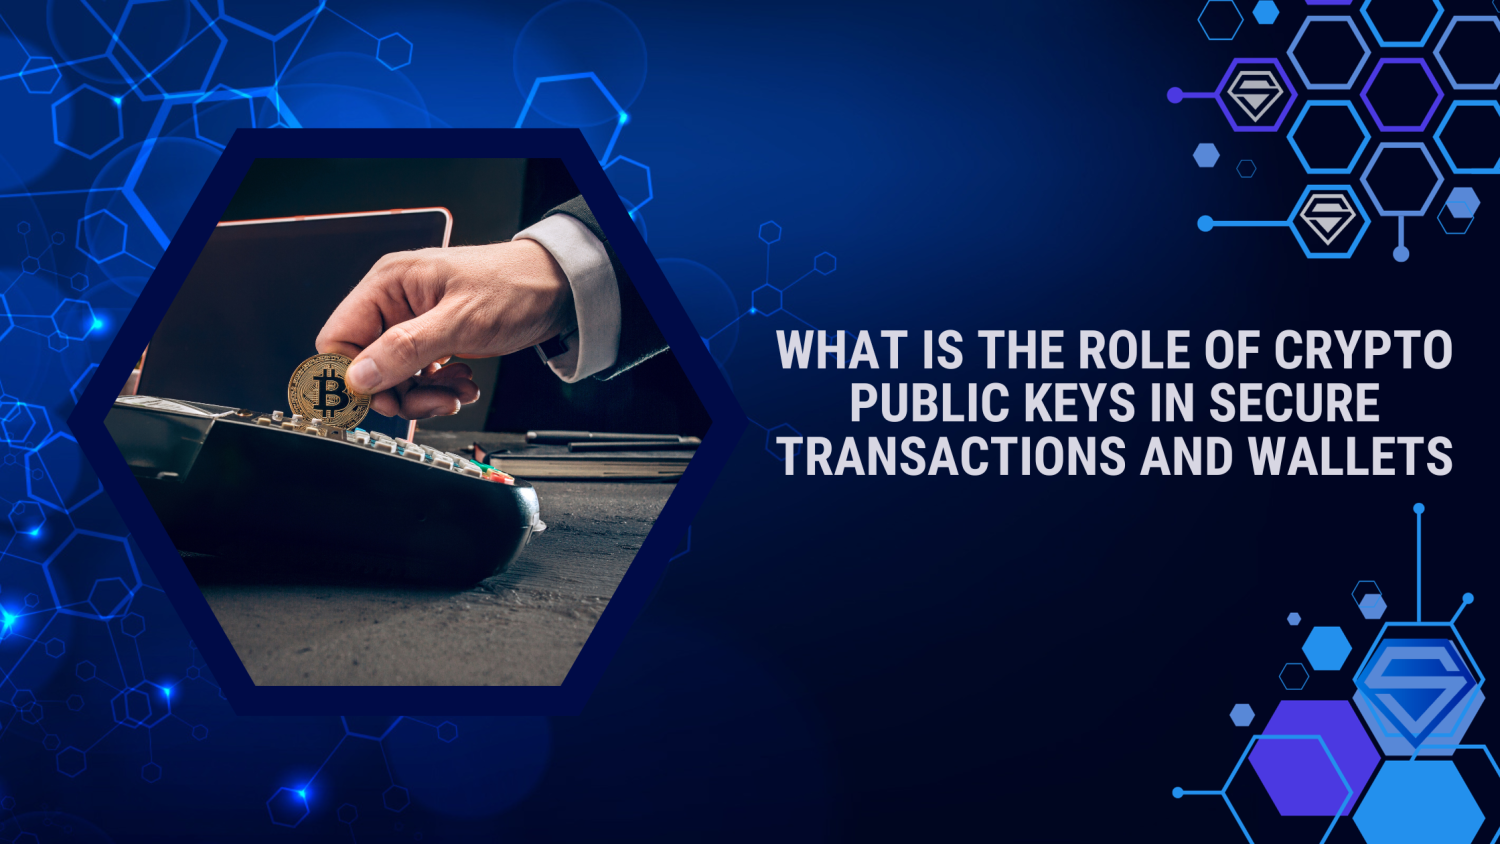 What is the Role of Crypto Public Keys in Secure Transactions and Wallets